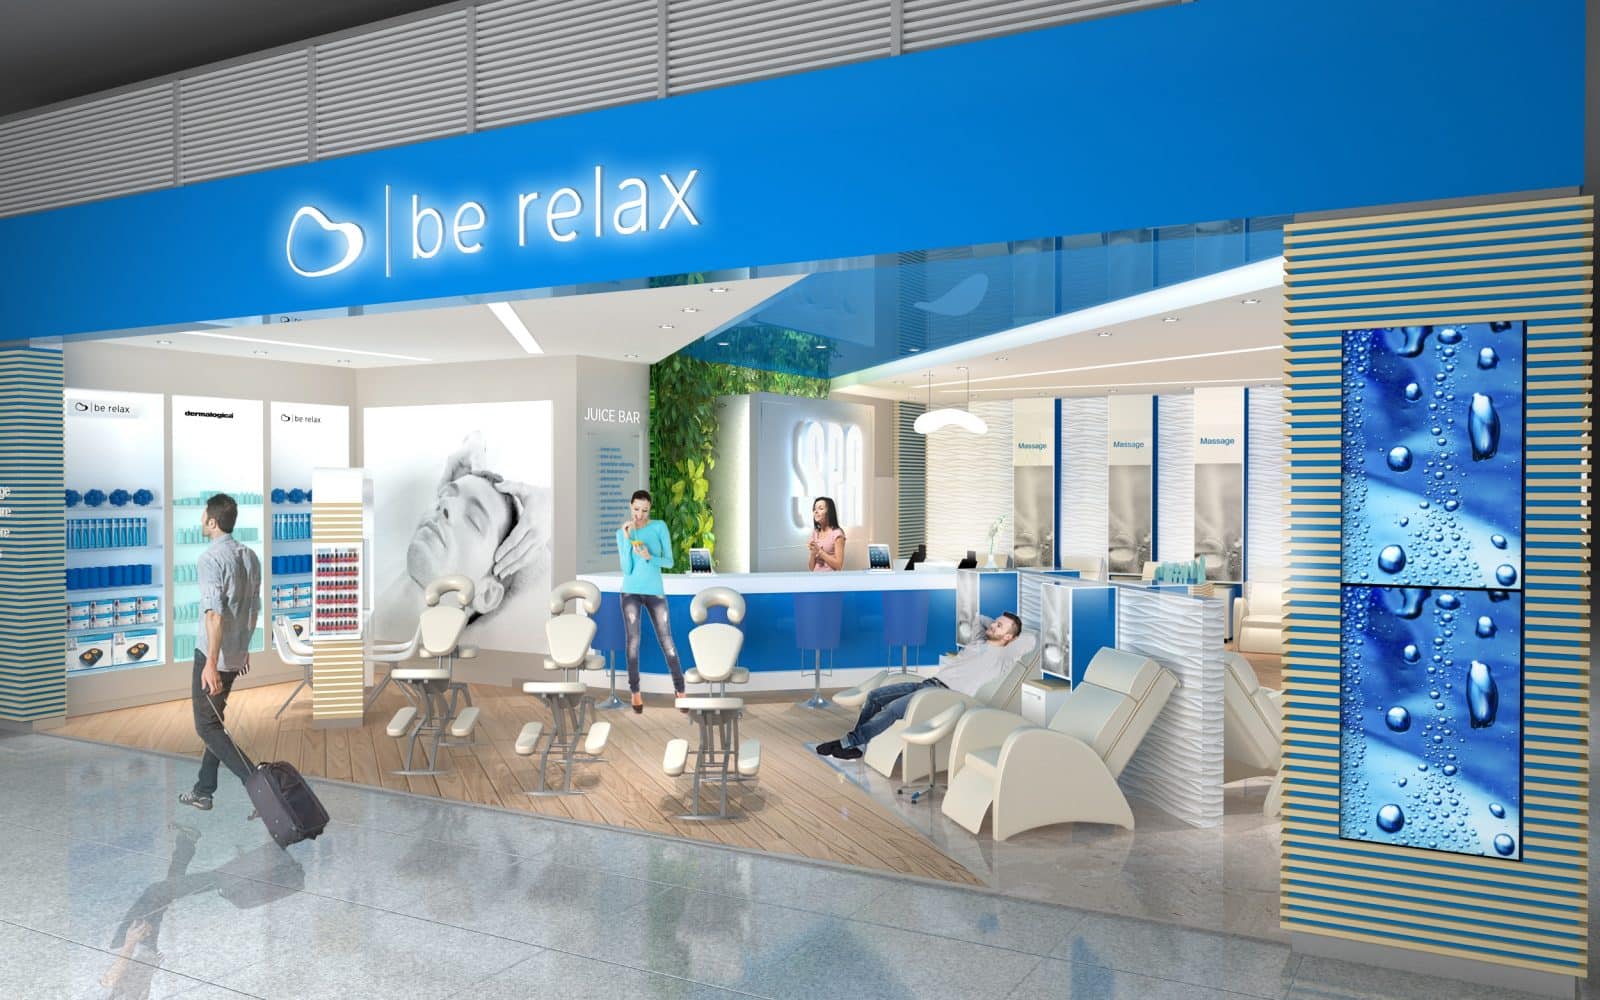 HIA opens travel wellness spa ‘Be Relax’ at terminal